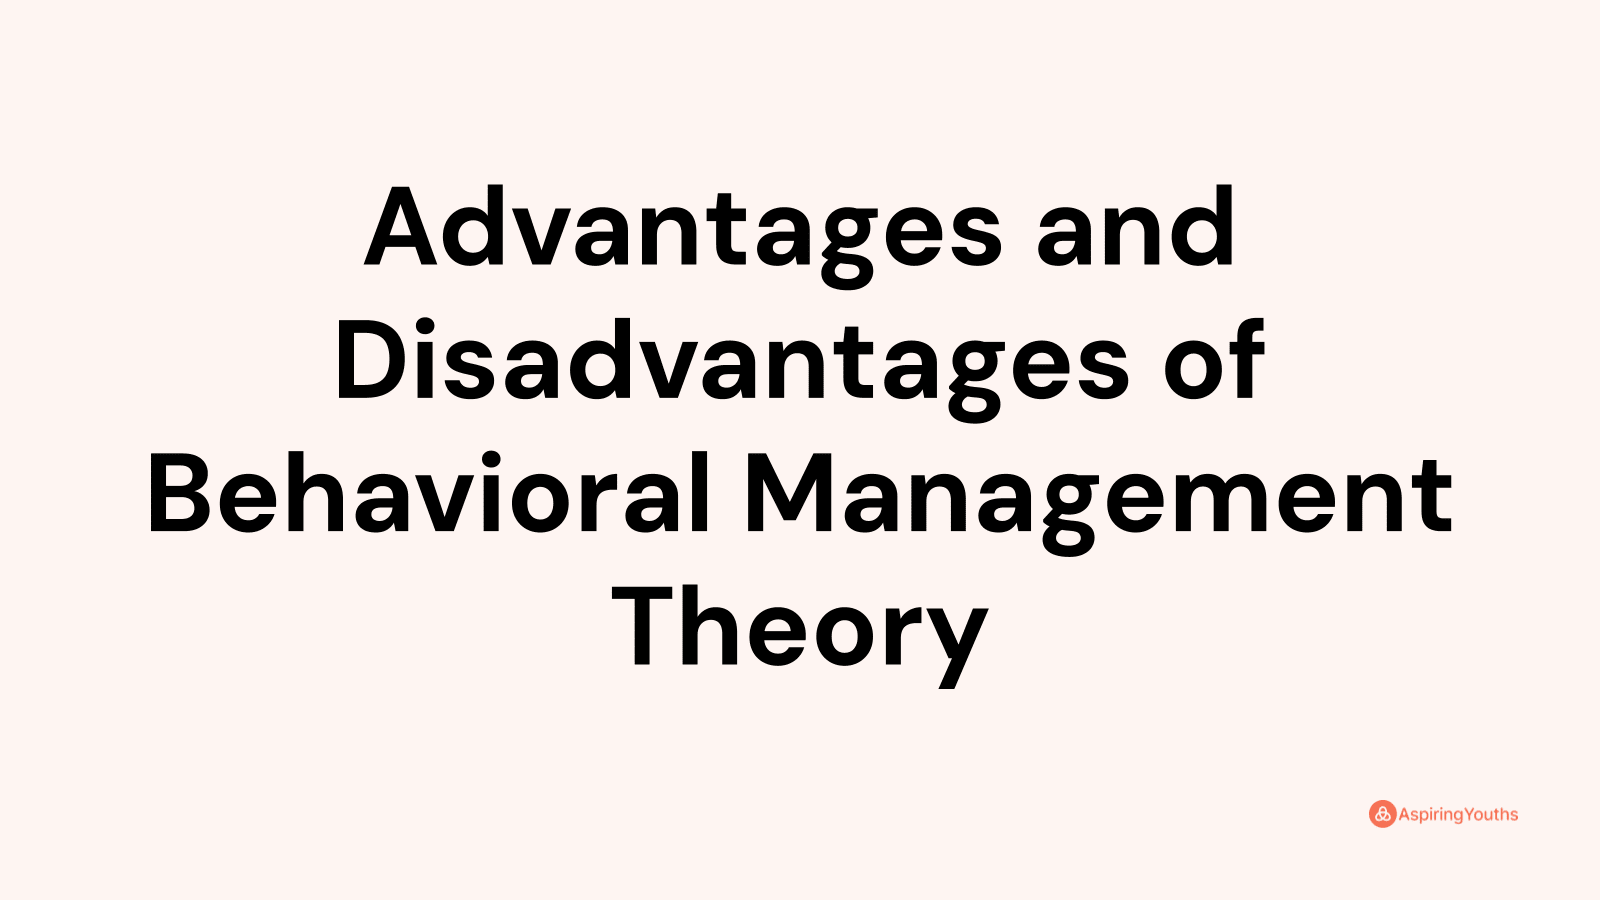 Advantages and disadvantages of Behavioral Management Theory